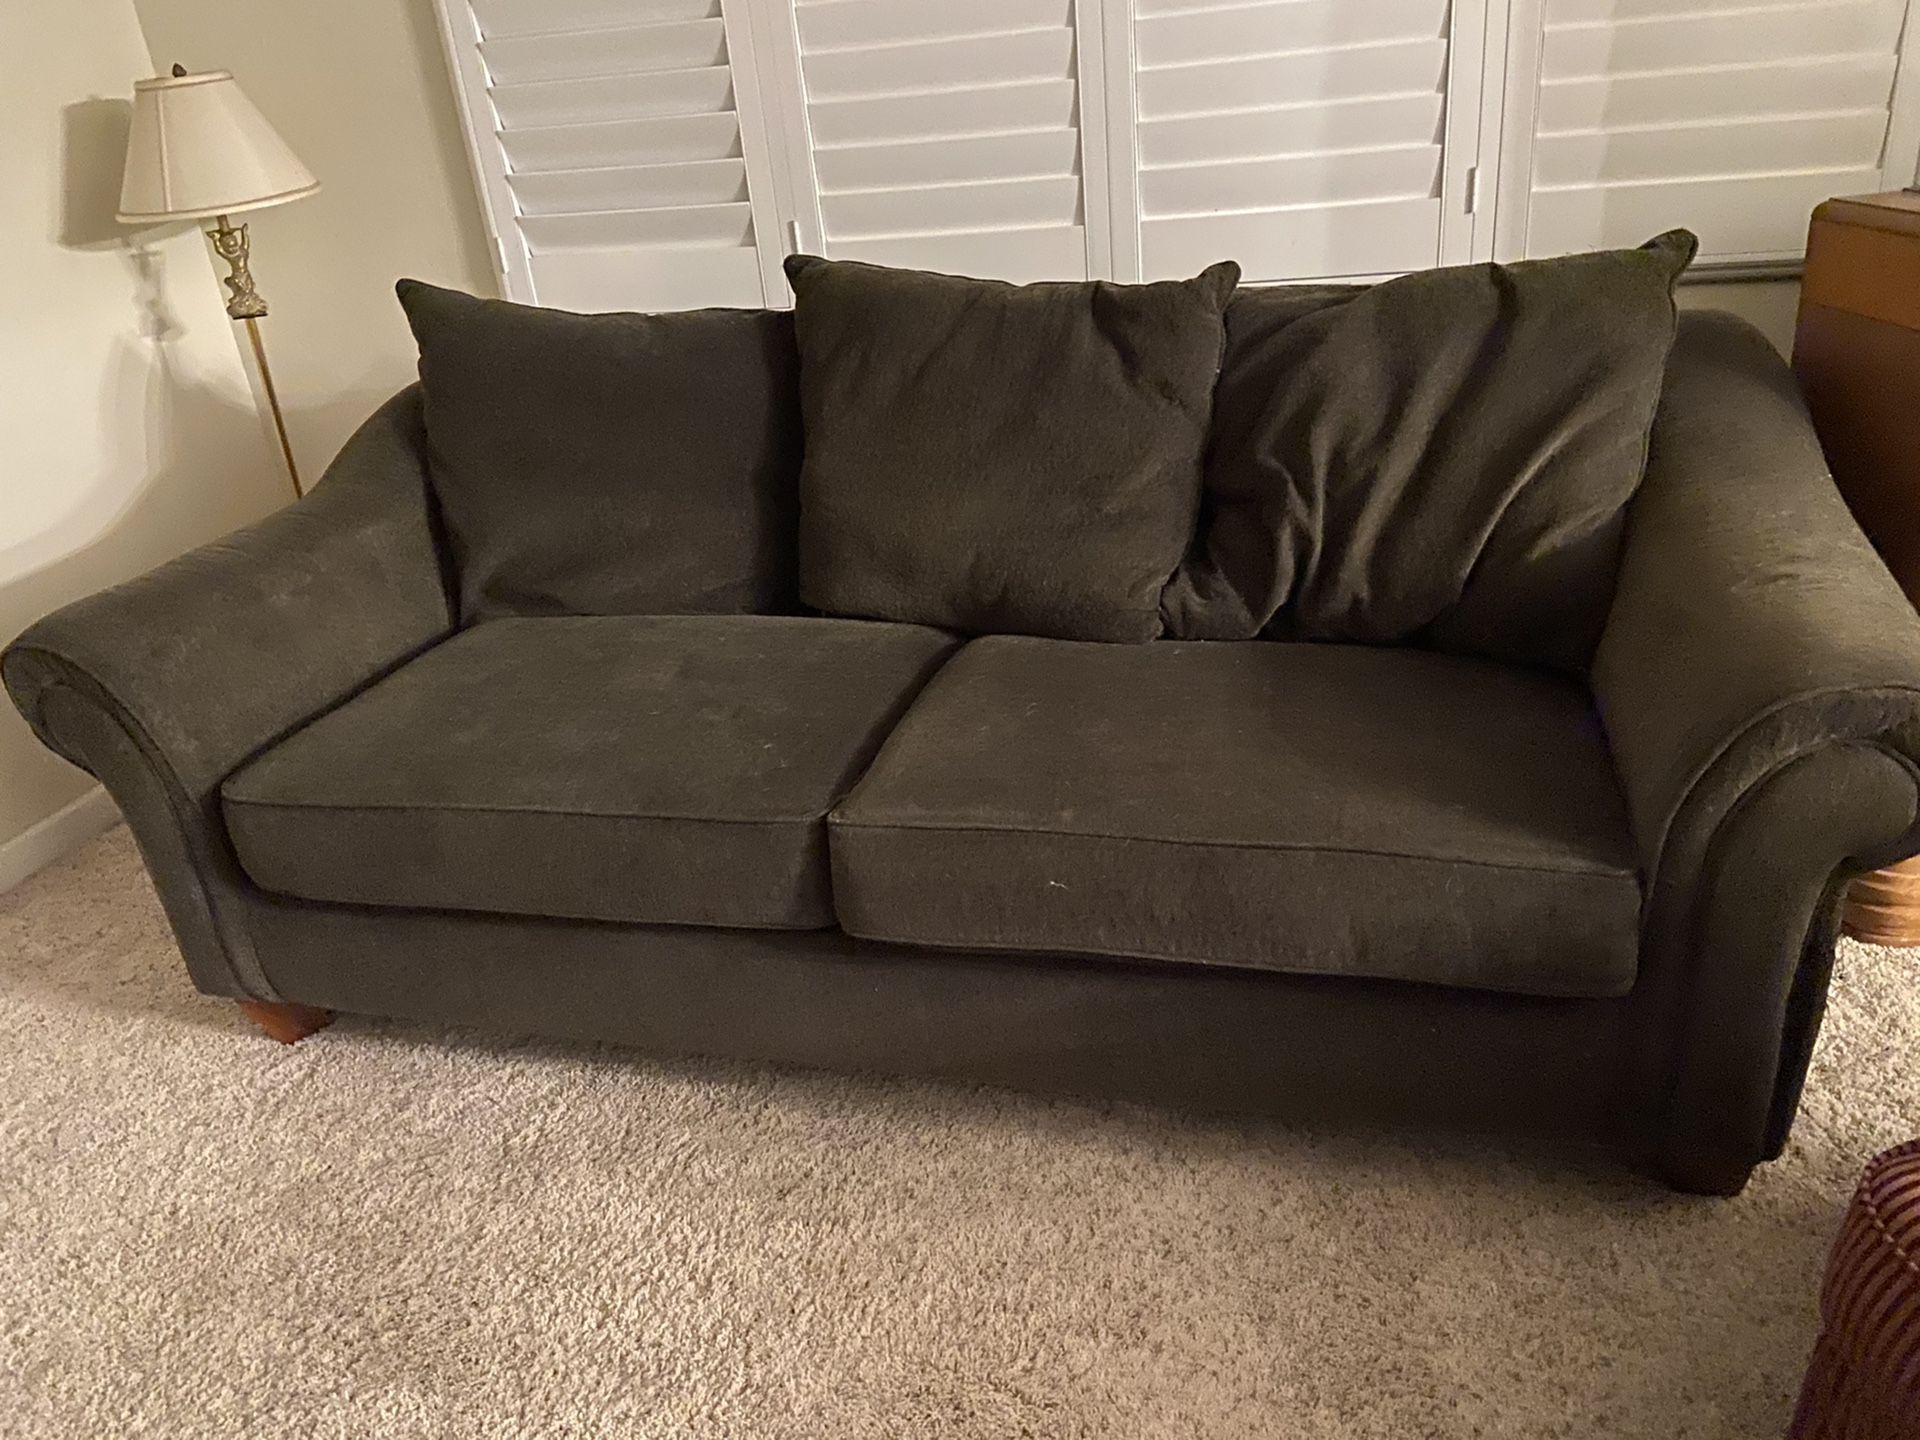 FREE BROWN COUCH - upholstery recently cleaned